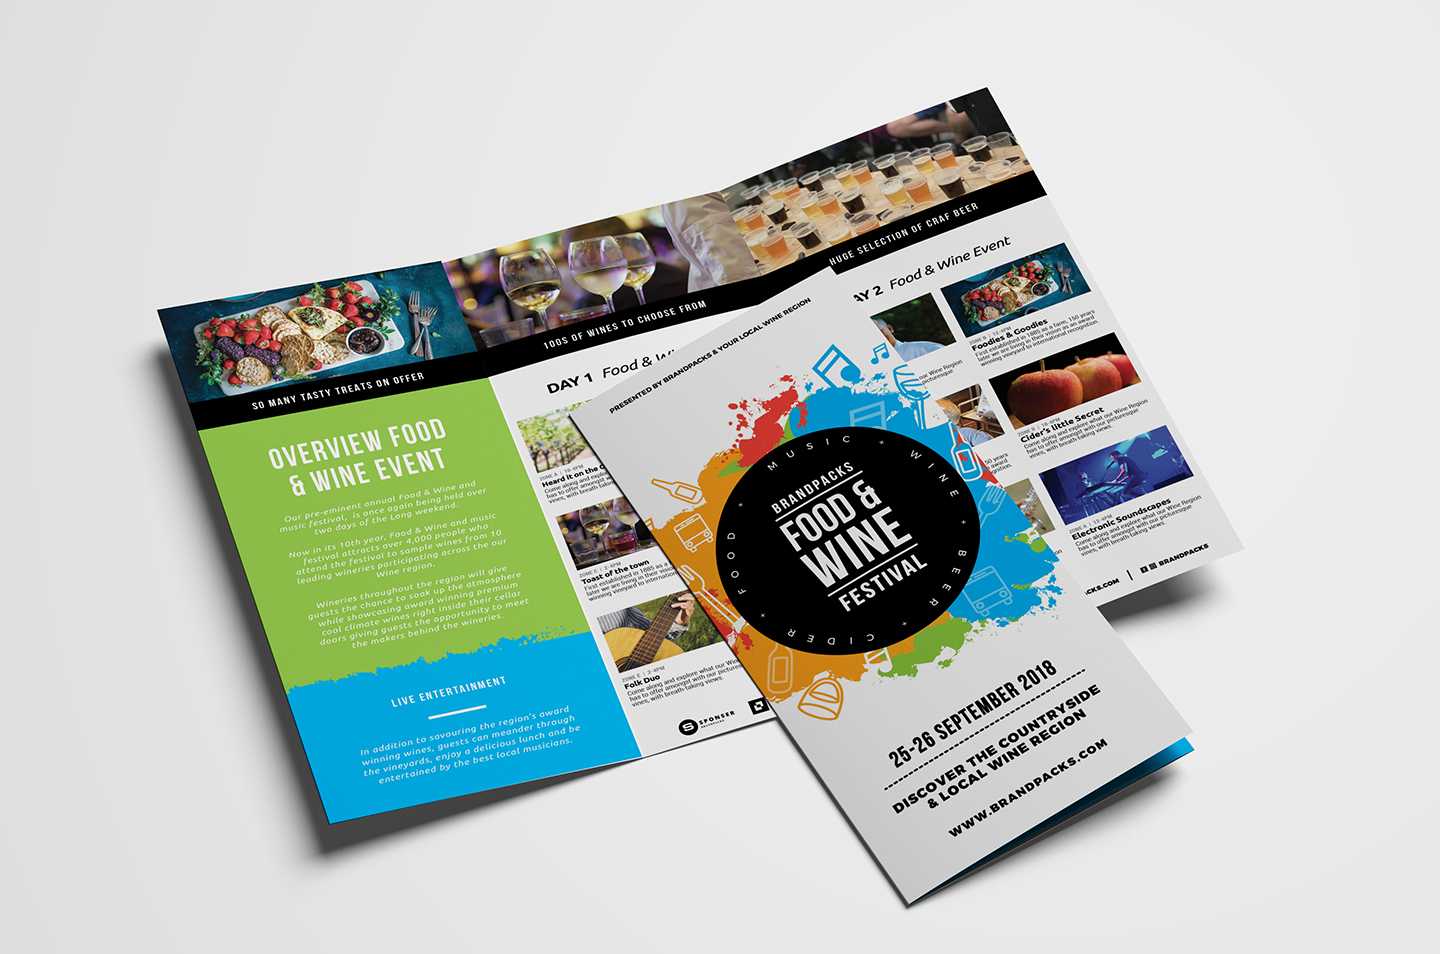 Free Tri Fold Brochure Template For Events & Festivals – Psd Inside 2 Fold Brochure Template Psd